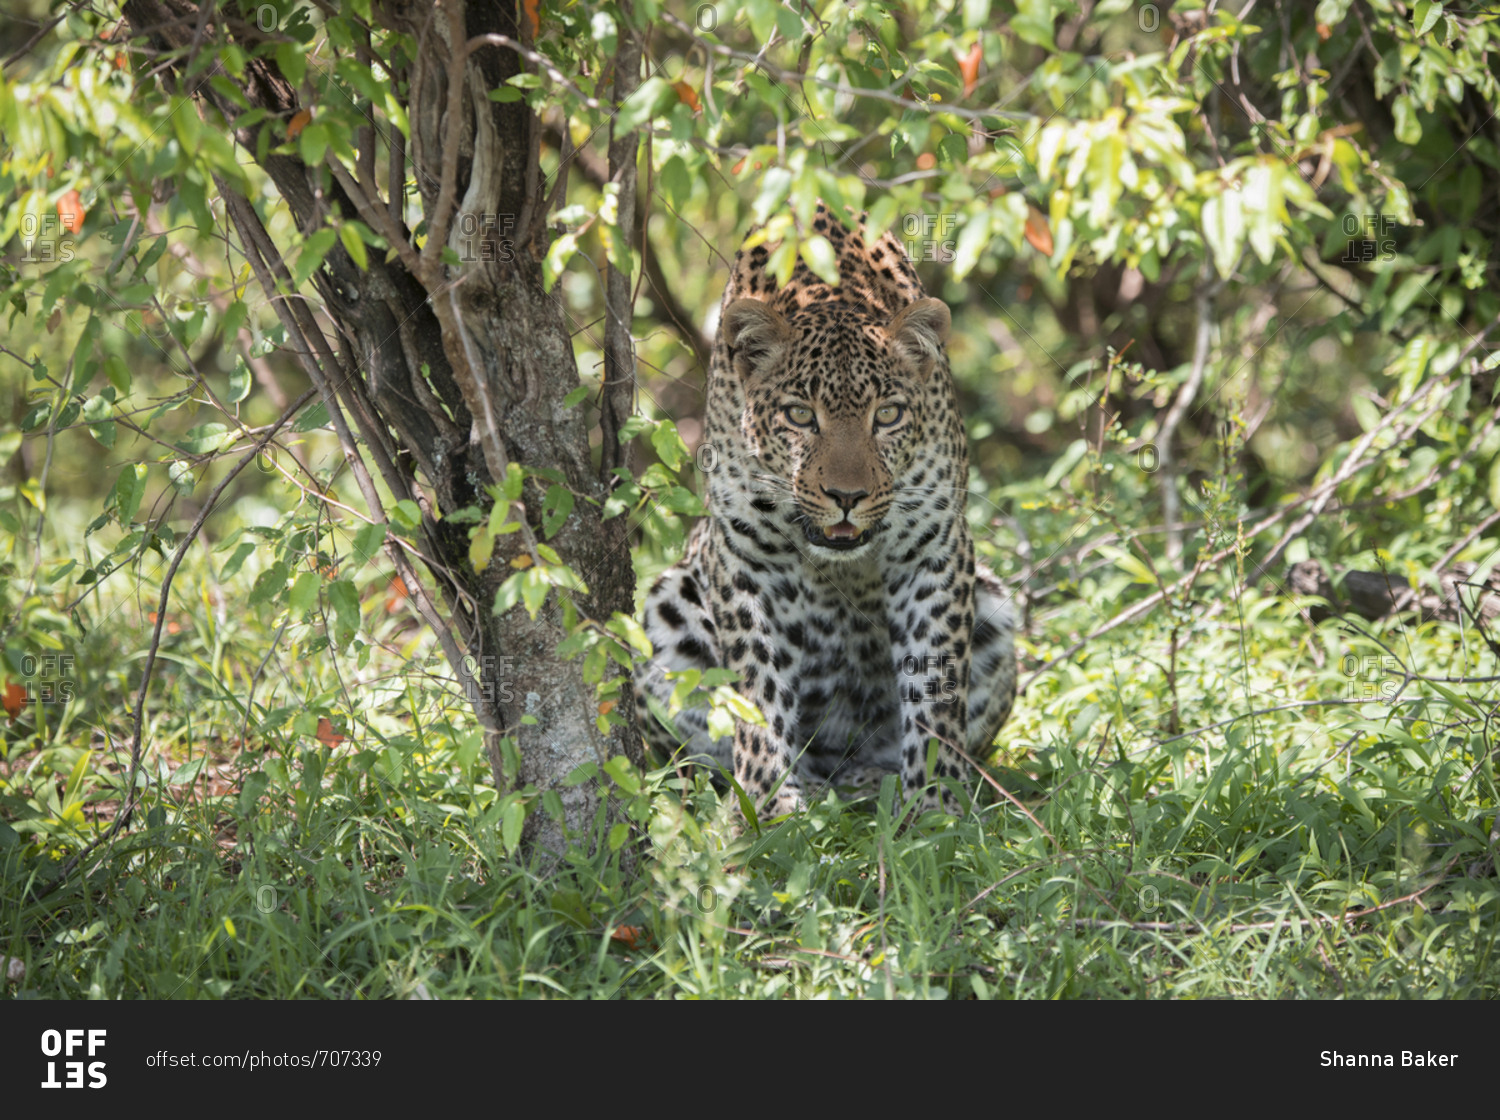 Female leopard watching potential prey from the cover of a tree in the Maasai Mara National Reserve, Kenya